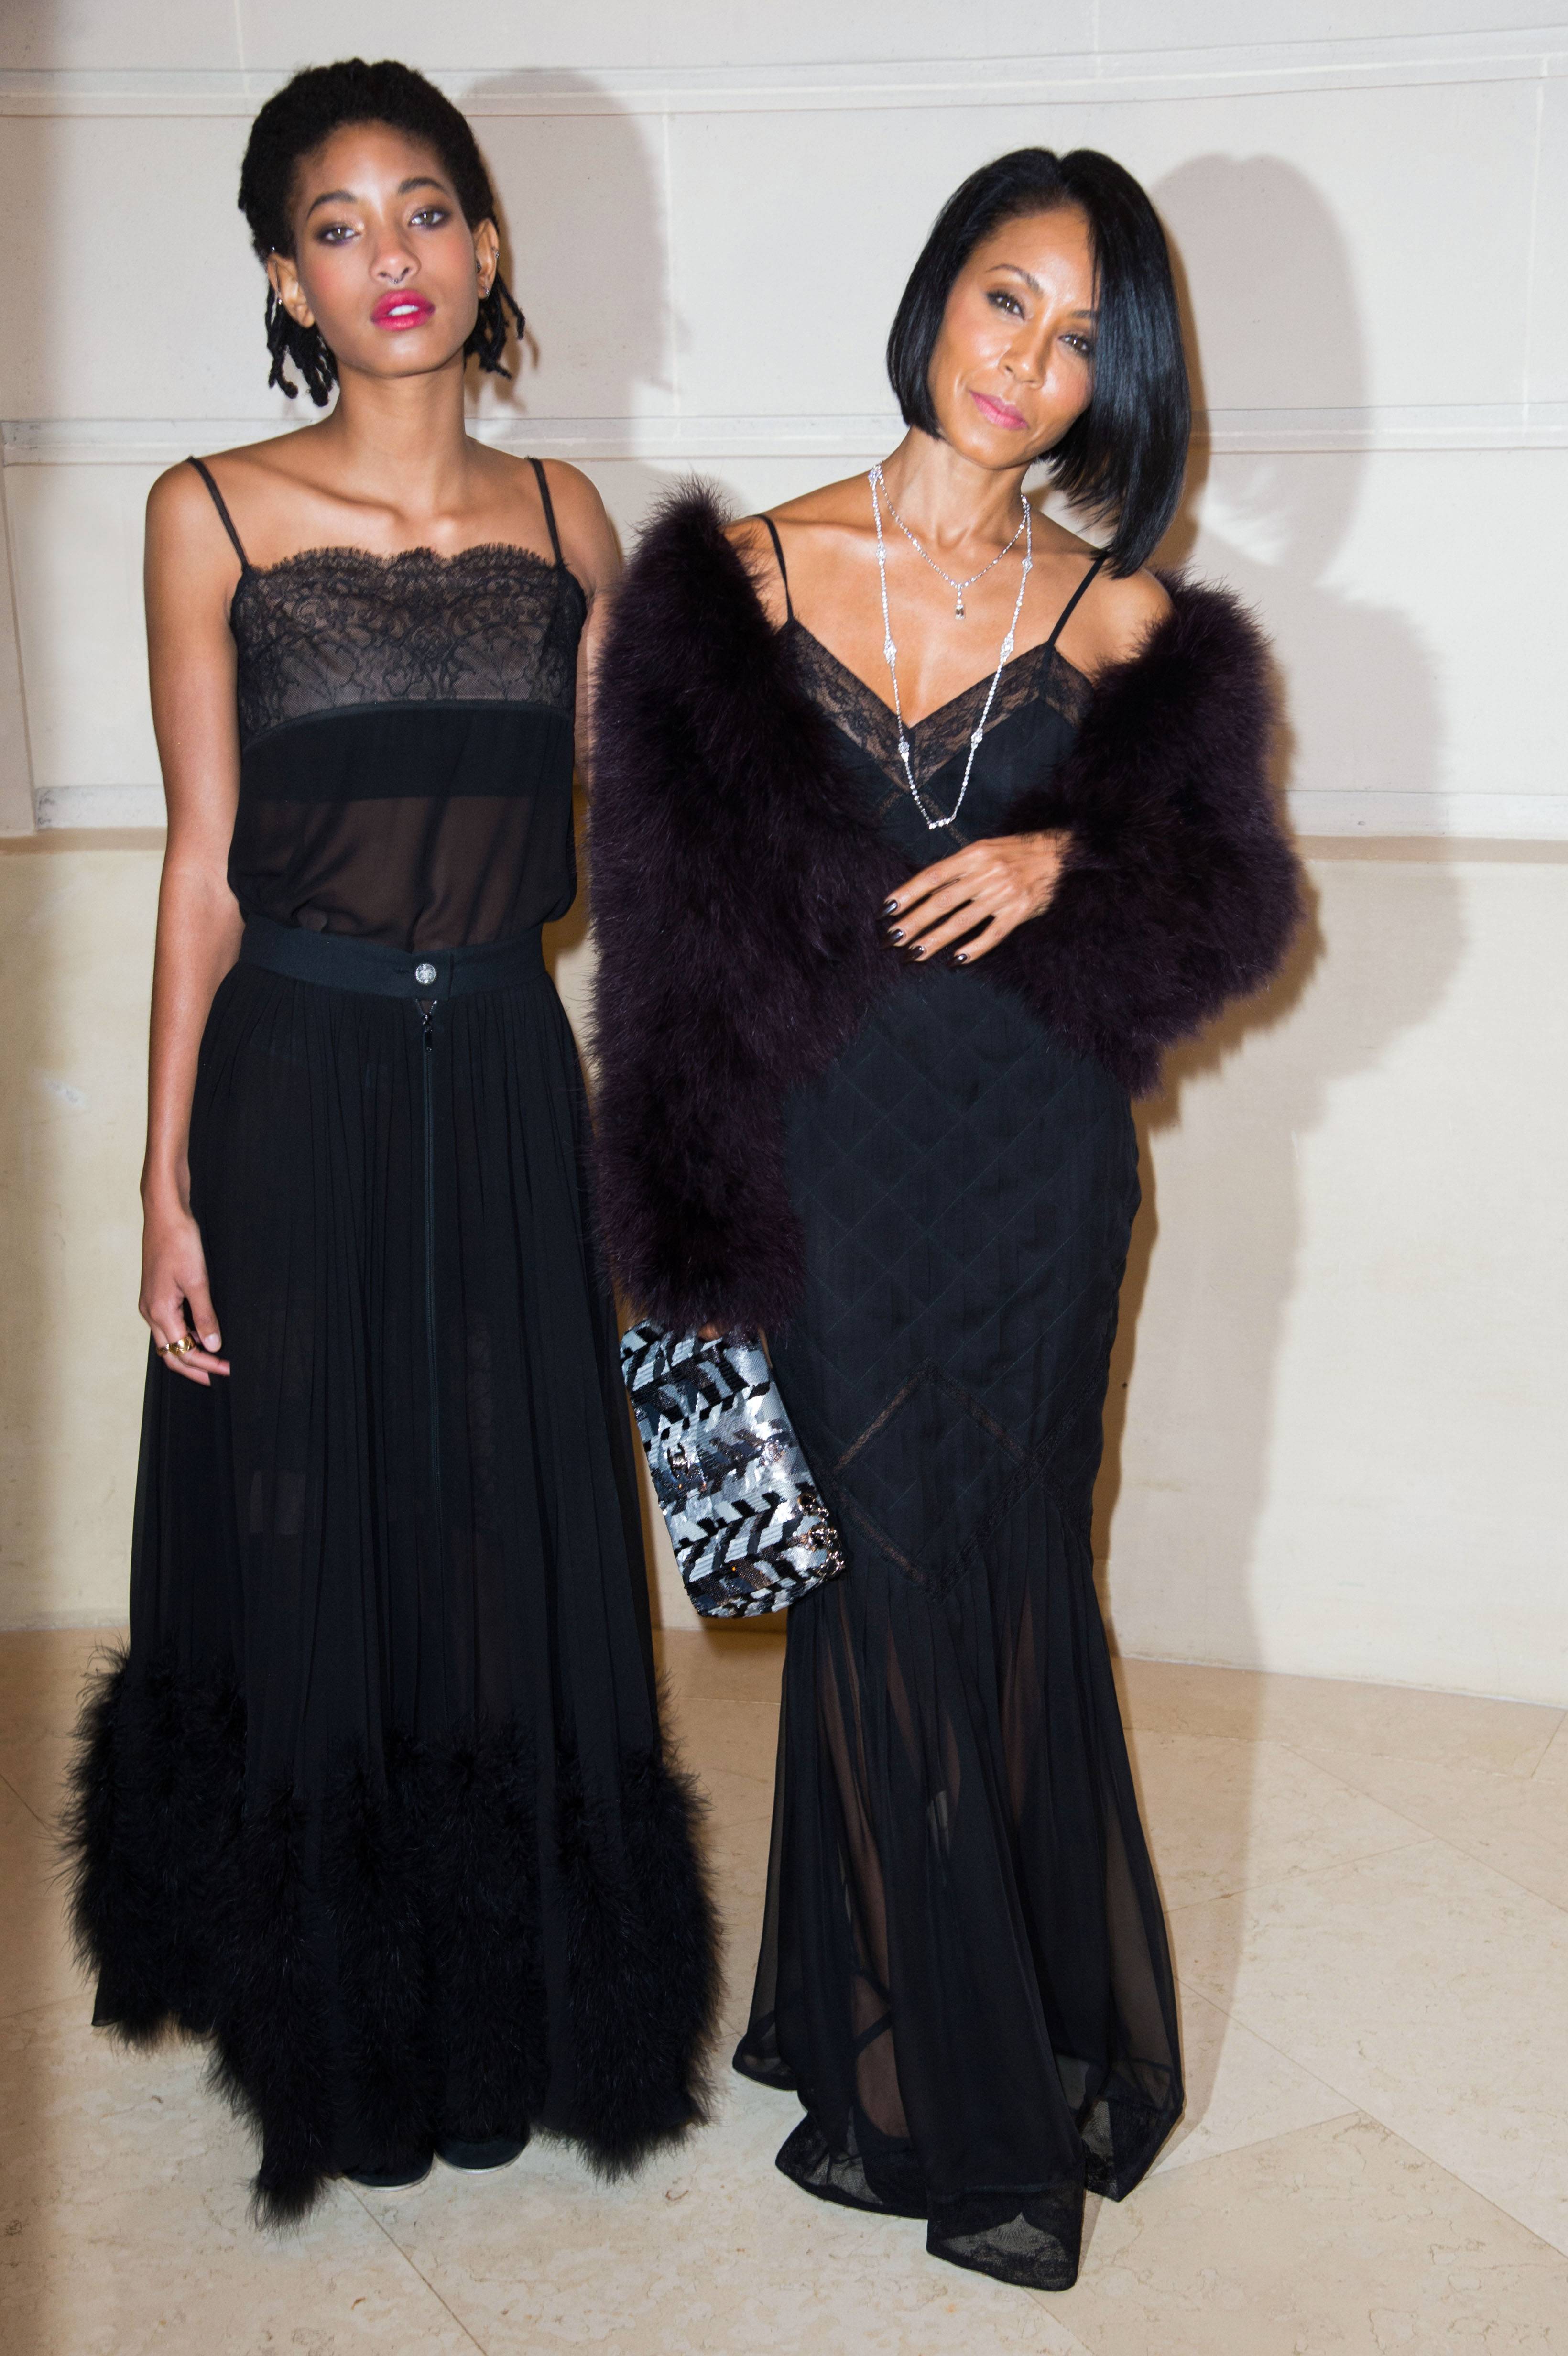 PARIS, FRANCE - DECEMBER 06:  Willow Smith and Jada Pinkett Smith attend the "Chanel Collection des Metiers d'Art 2016/17 : Paris Cosmopolite" show on December 6, 2016 in Paris, France.  (Photo by Stephane Cardinale - Corbis/Corbis via Getty Images)